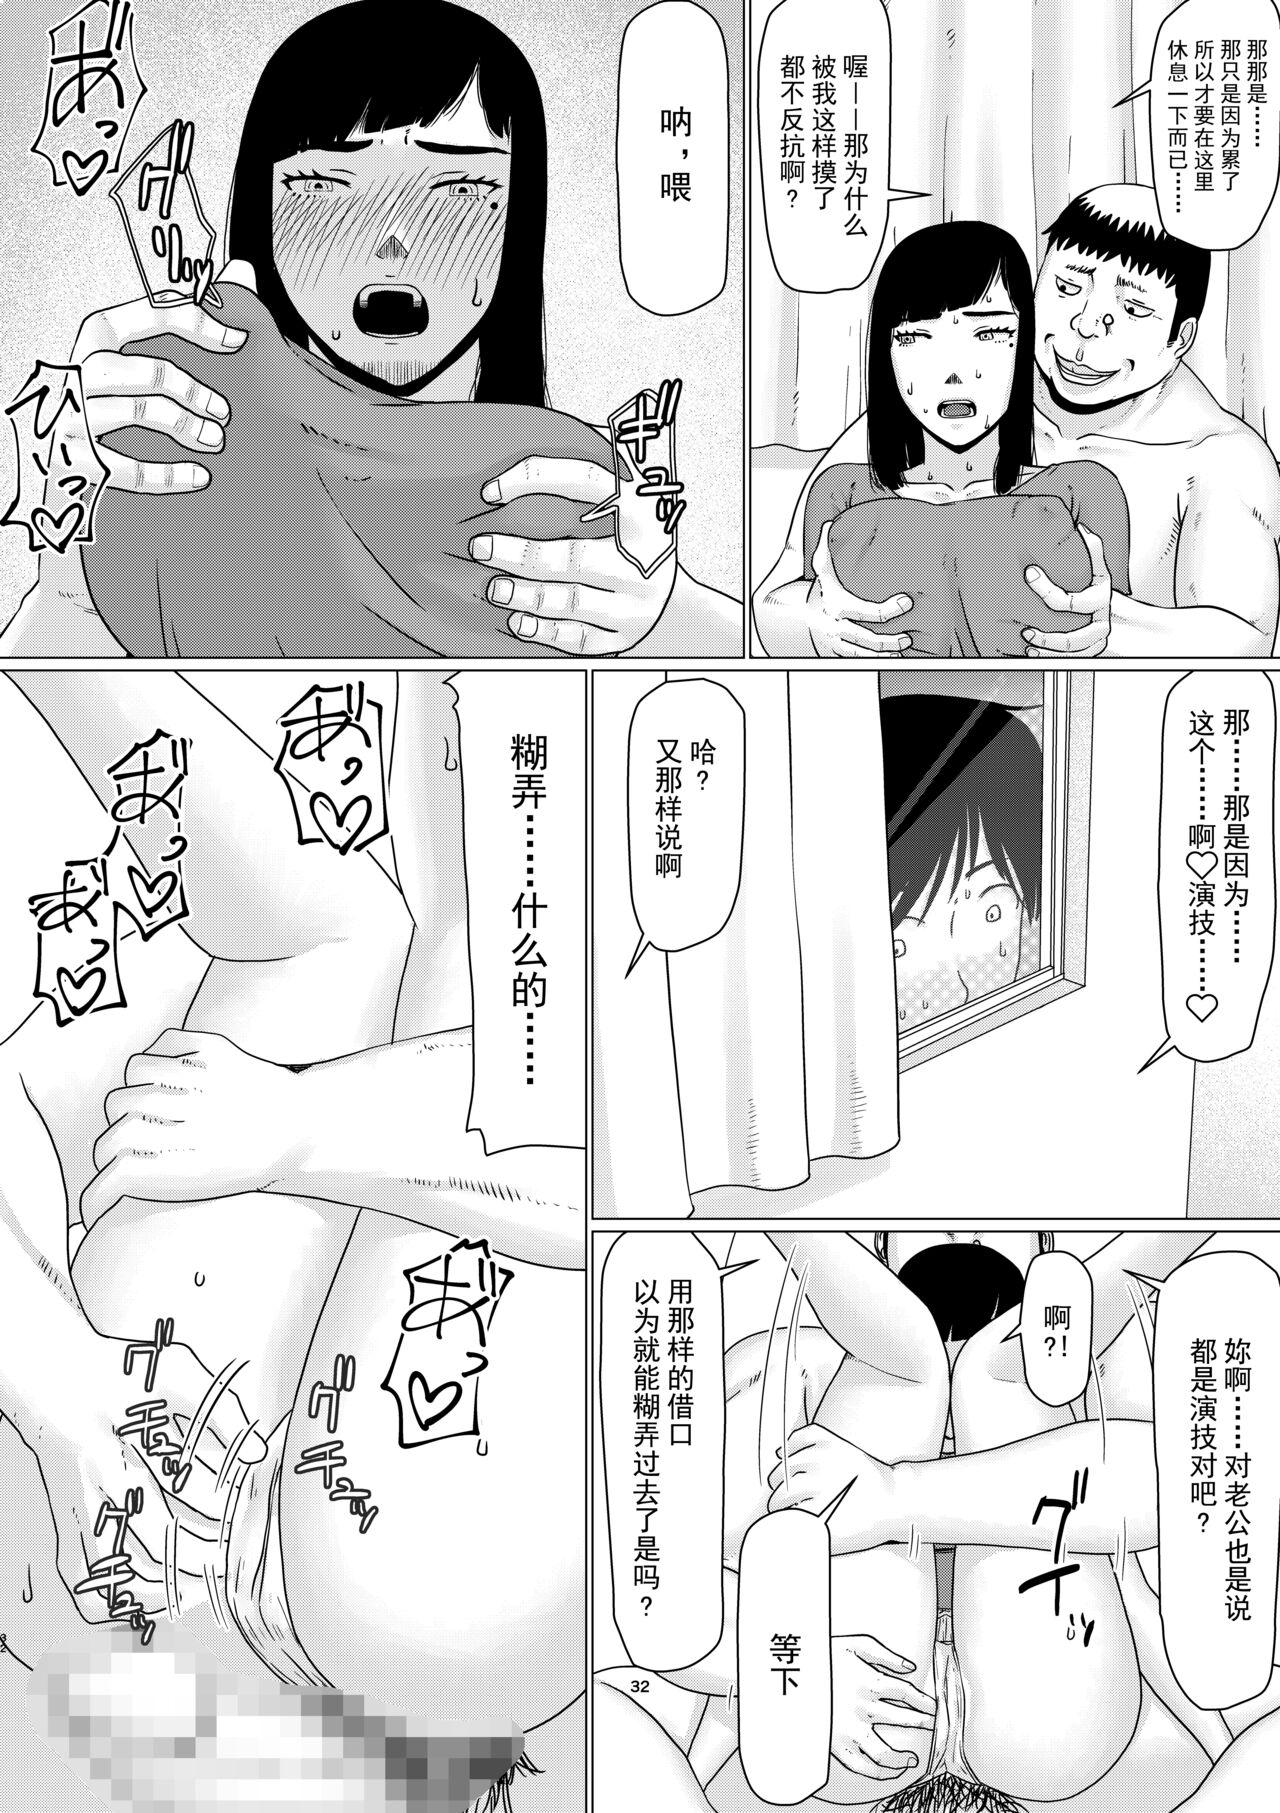 (Dōjinshi) Chieri can't lose!3 -Perverted toilet wife who fertilizes anyone's sperm with her husband's approval- Volume 1 (Original) [Chinese][超勇漢化組] 33